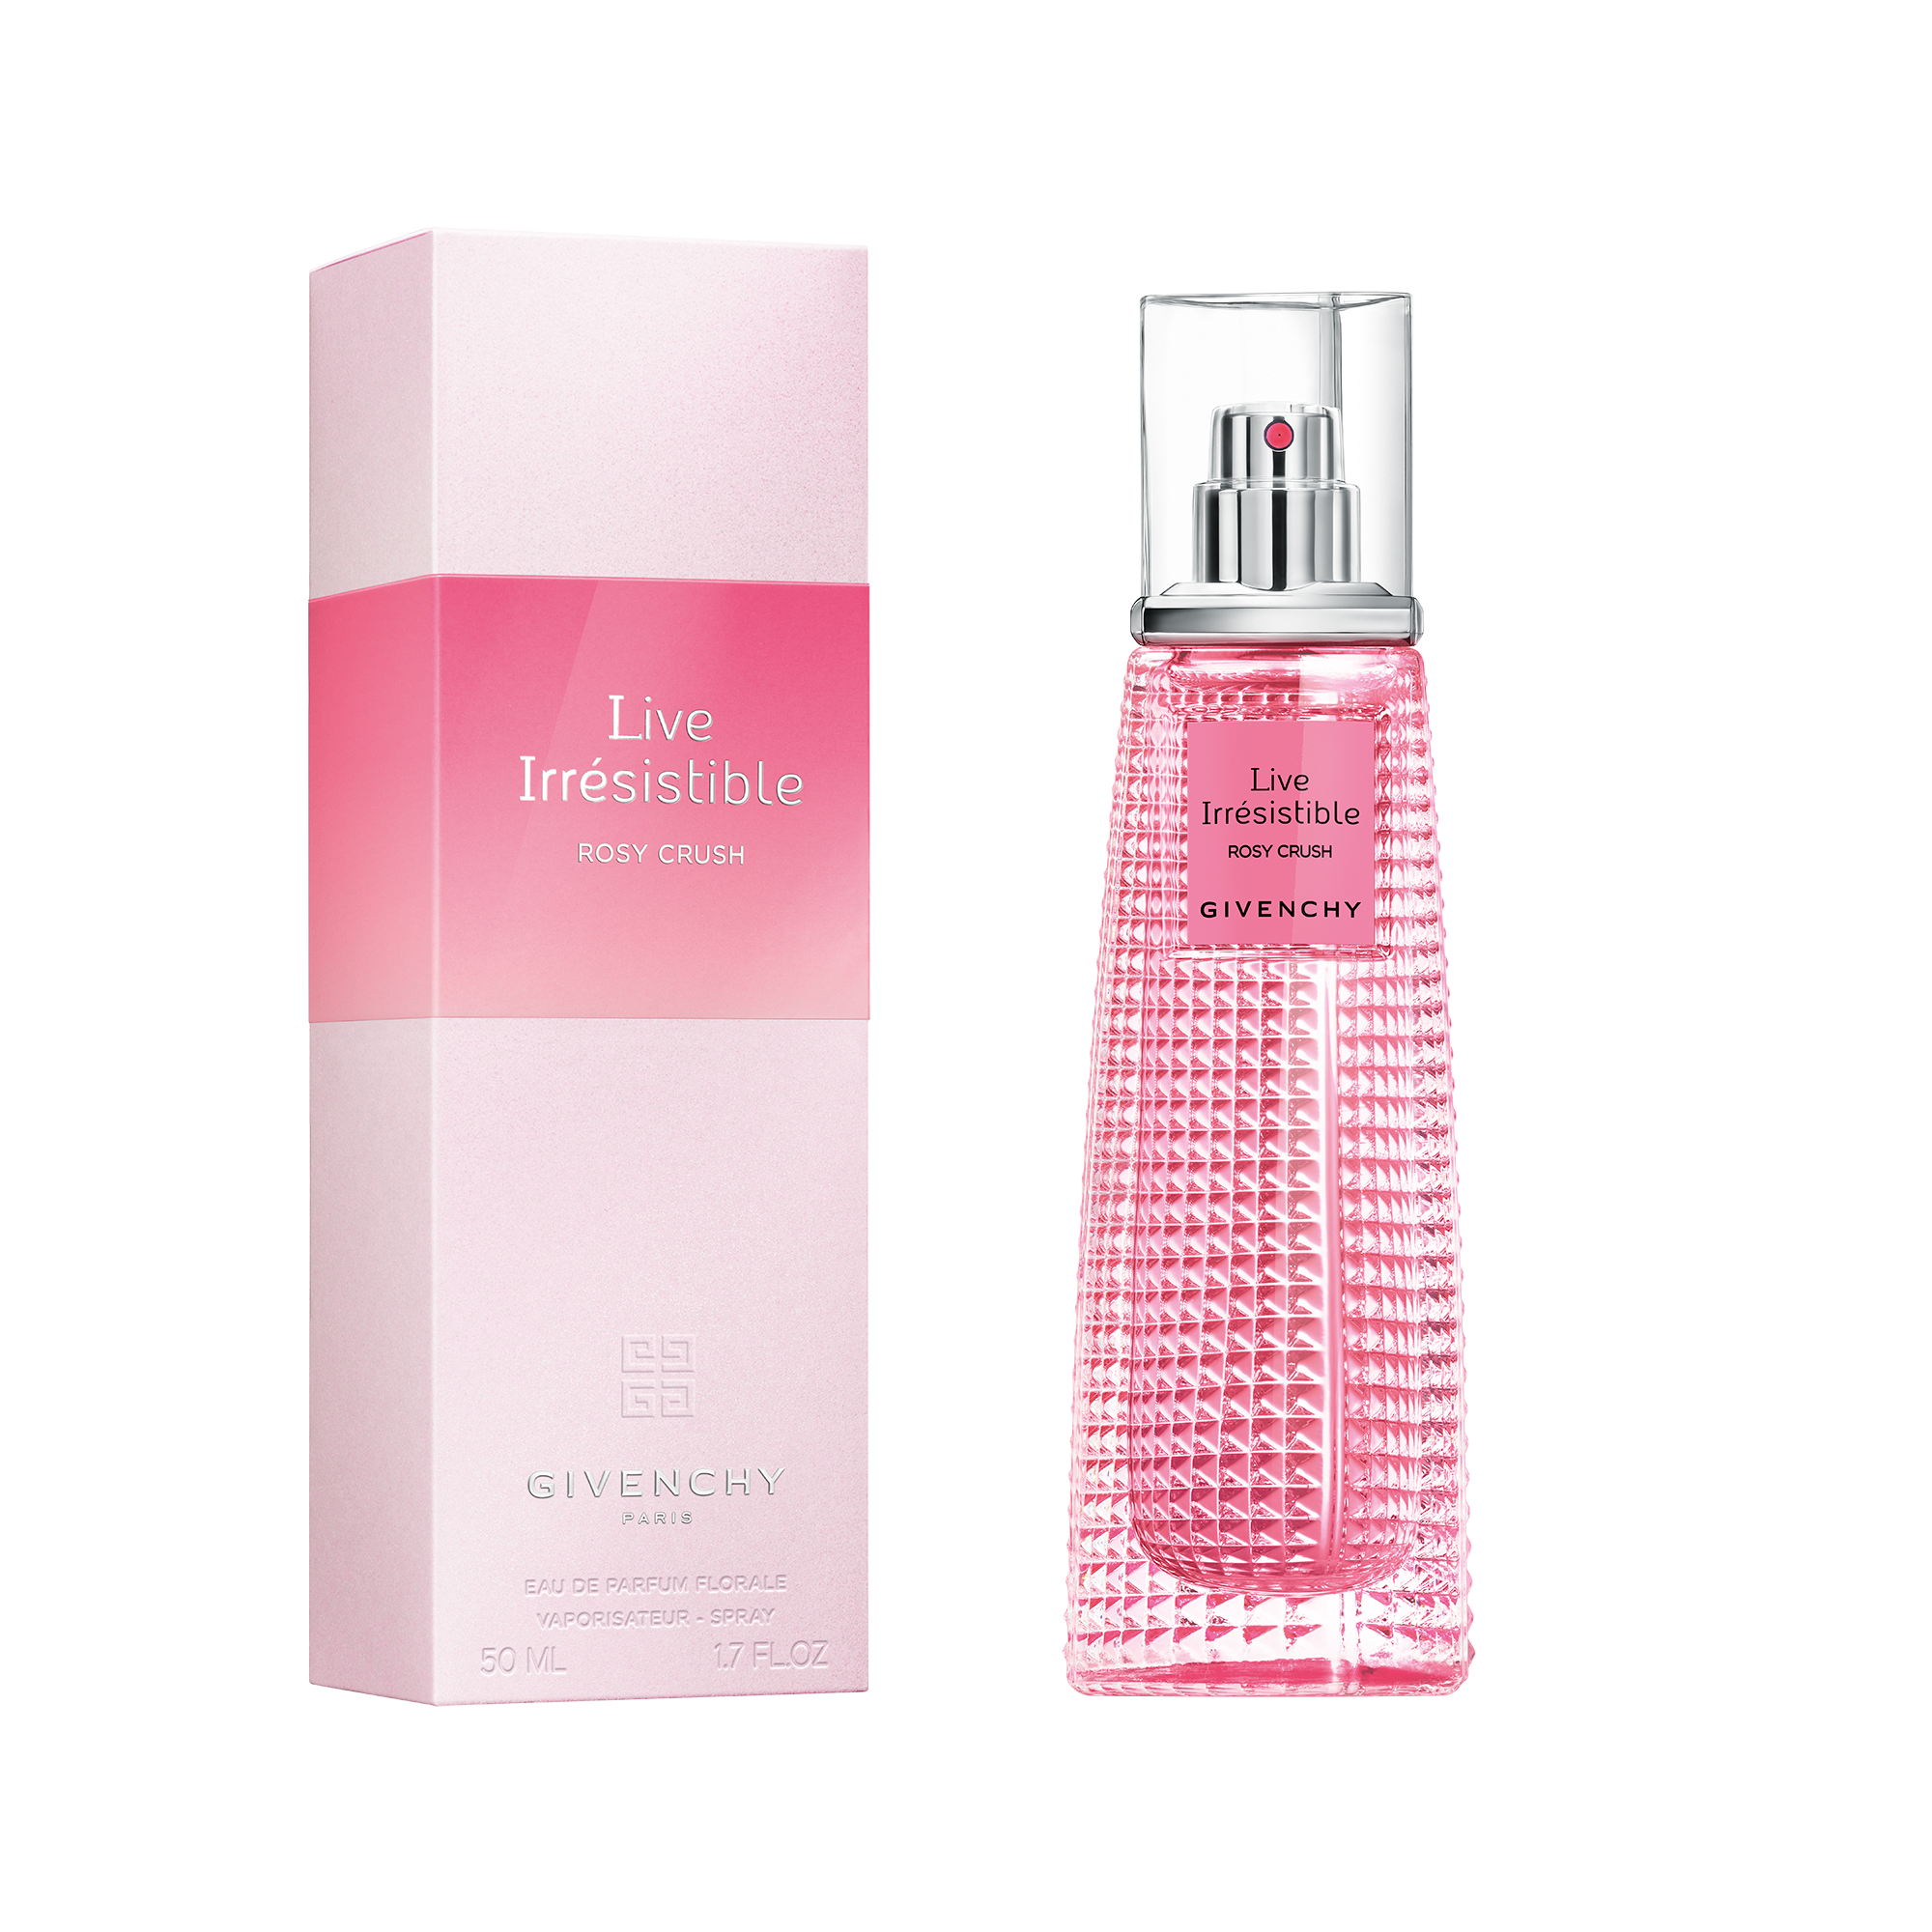 LIVE IRRÉSISTIBLE ROSY CRUSH ∷ GIVENCHY